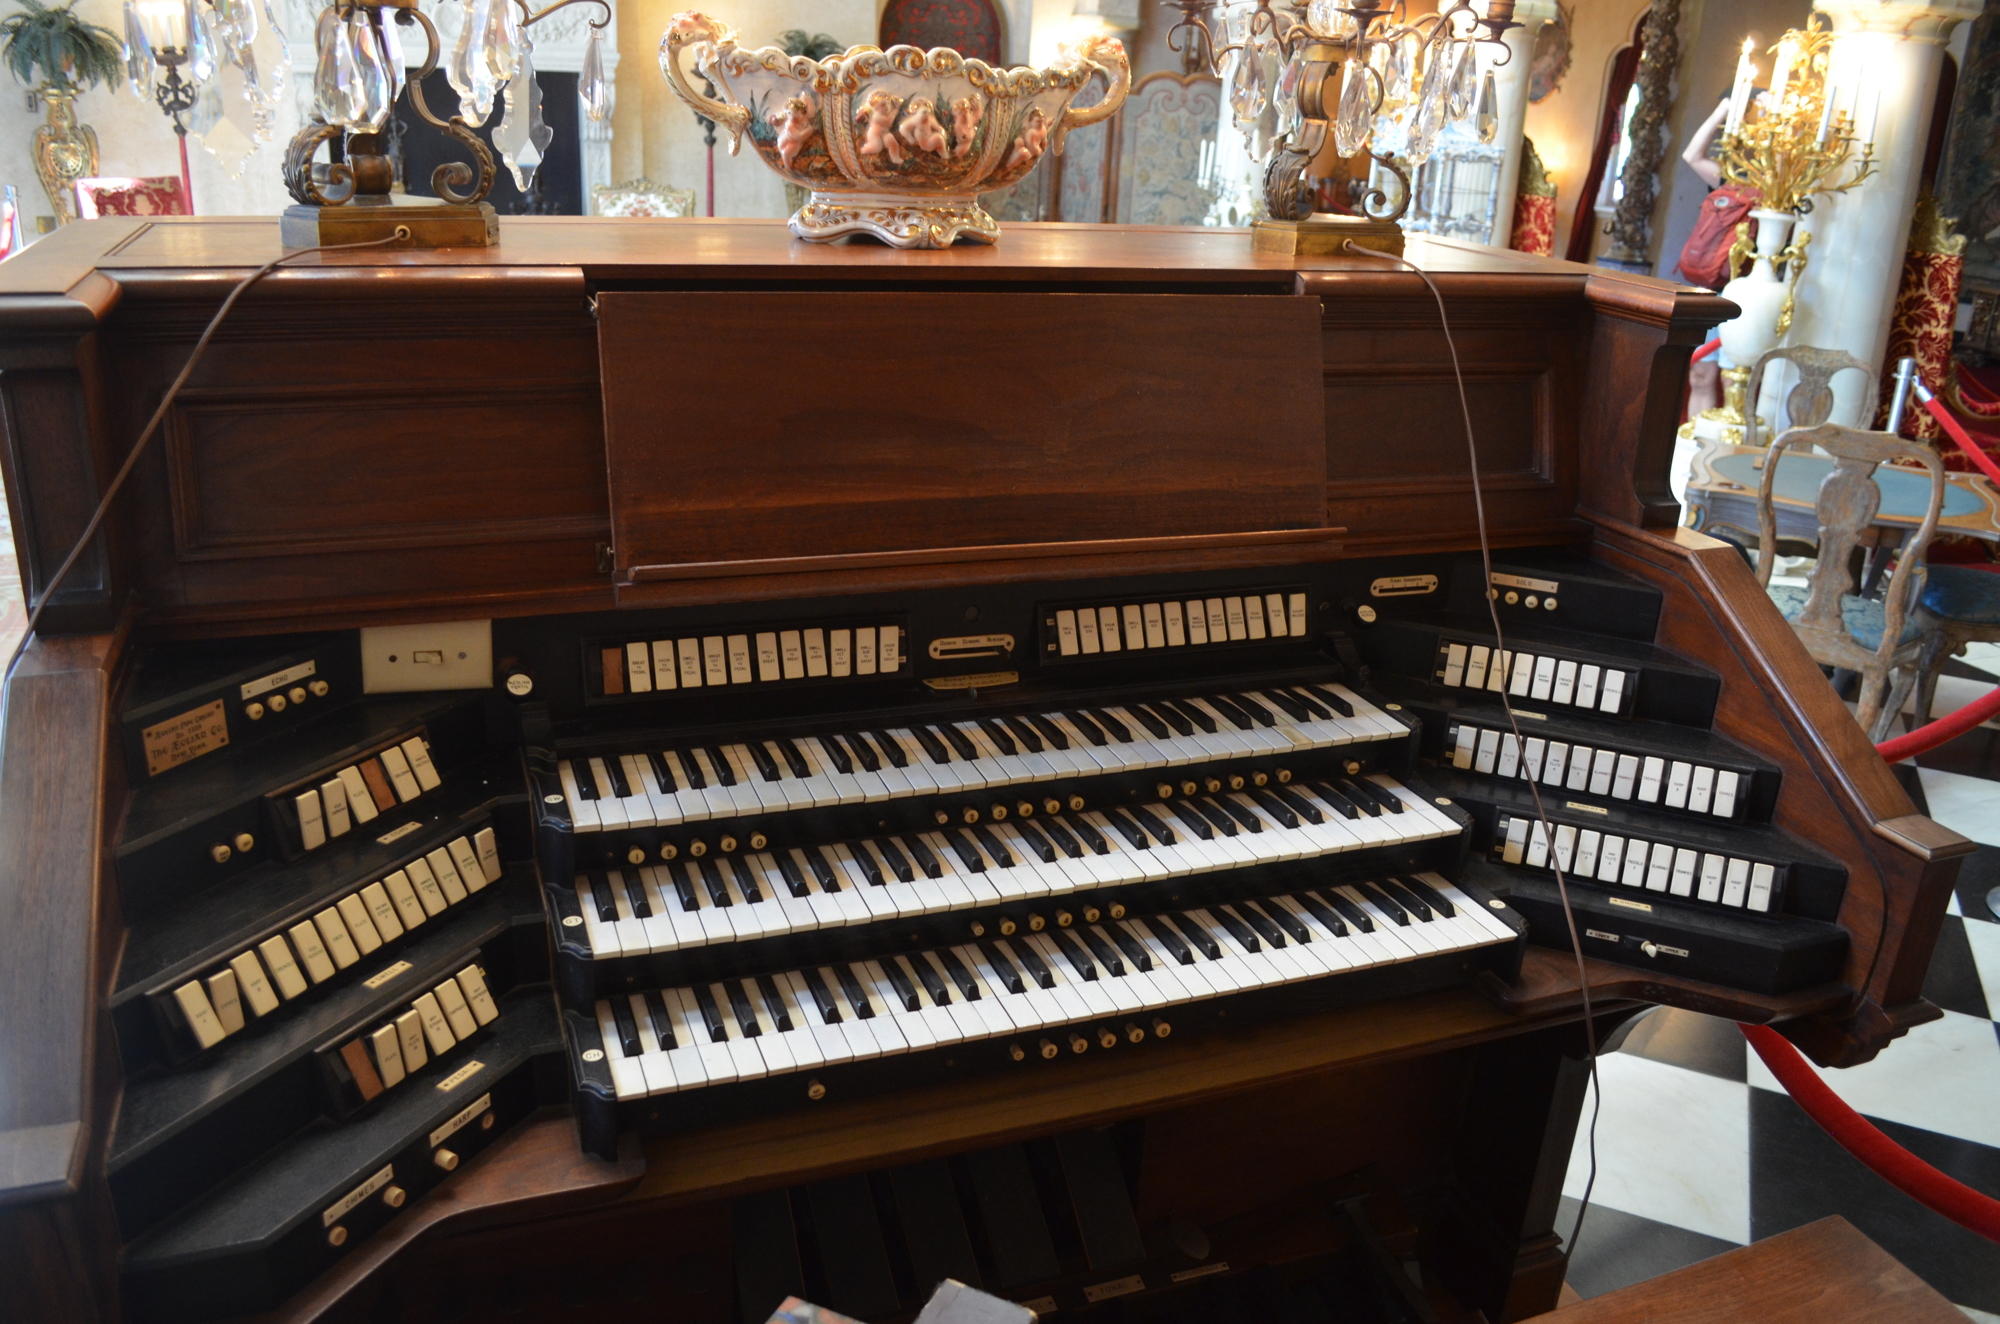 The mansion's two-story pipe organ is one of 60 built and only five of its type in existence. It will cost $1 million to restore and maintain it.